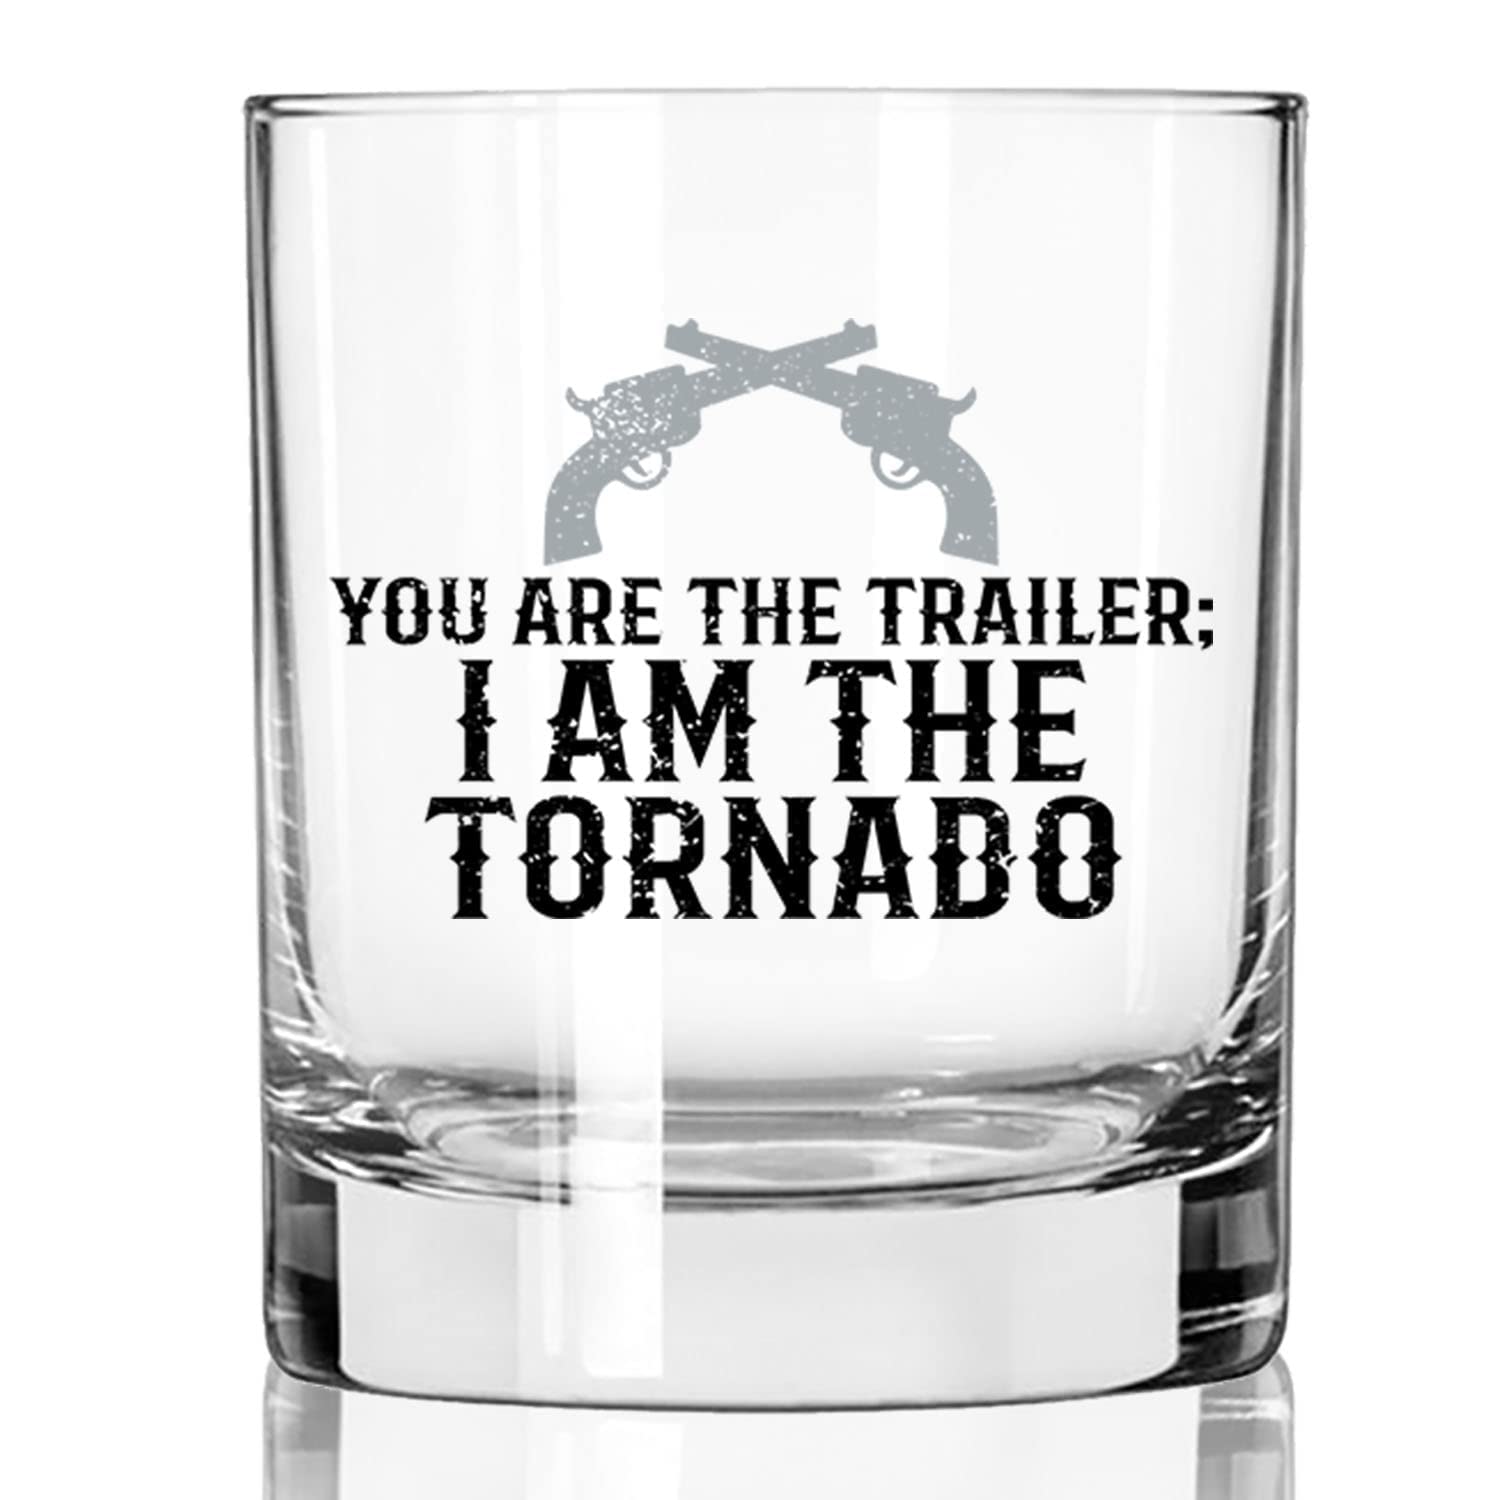 Toasted Tales I Am the Tornado | Old Fashioned Whiskey Glass Tumbler 11 oz. | Rocks Barware For Scotch, Bourbon, Liquor and Cocktail Drinks | Quality Chip Resistant Home Bar Whiskey Gift